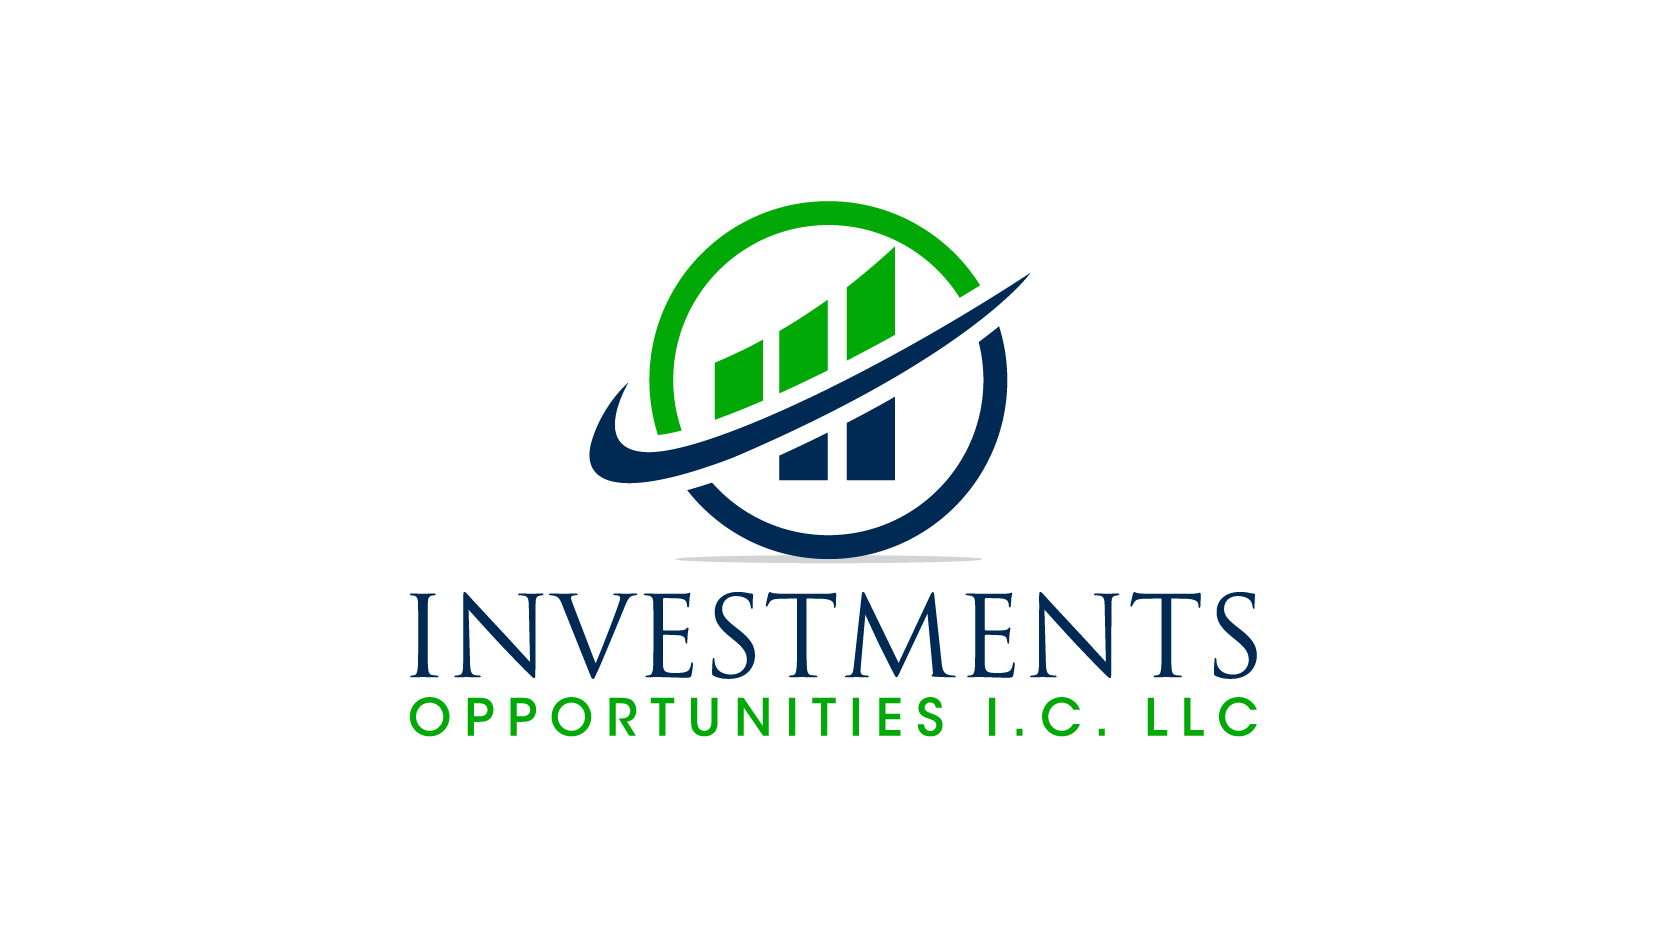 U. S. Invesments Company Logo - Investment Opportunities :: ::..